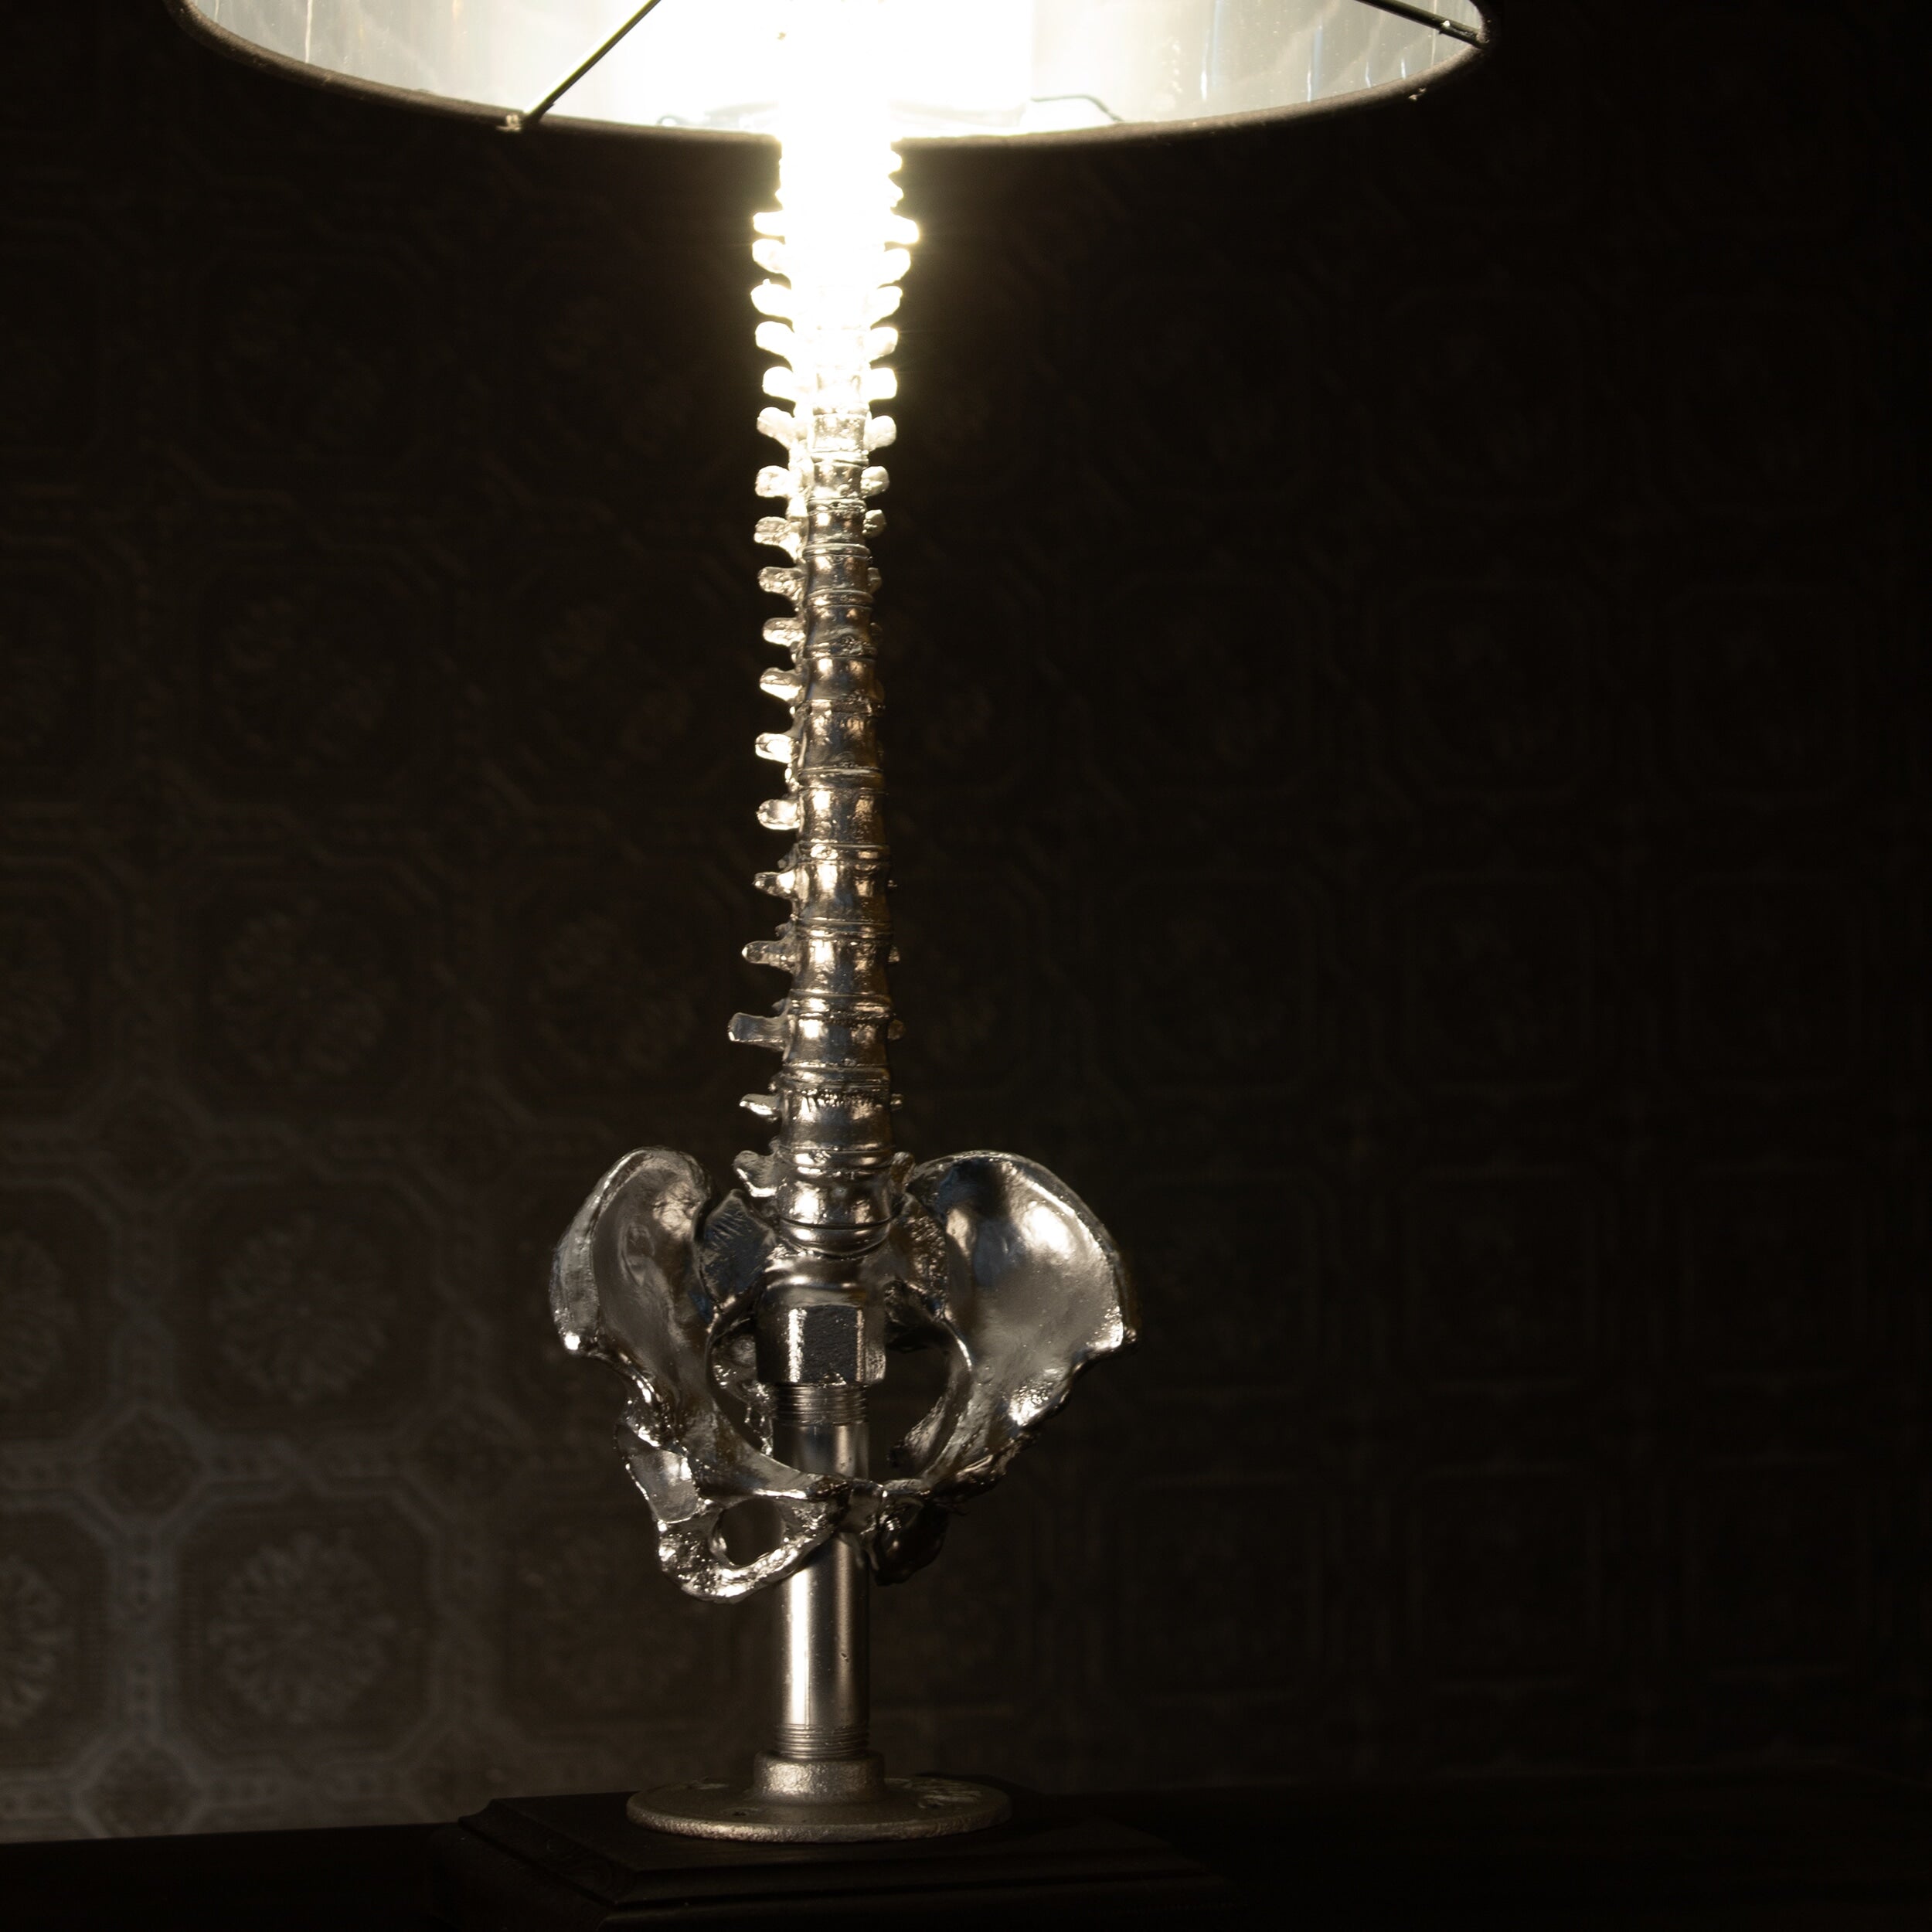 The Spine Table Lamp - Silver Edition by the Blackened Teeth Gothic Home Decor